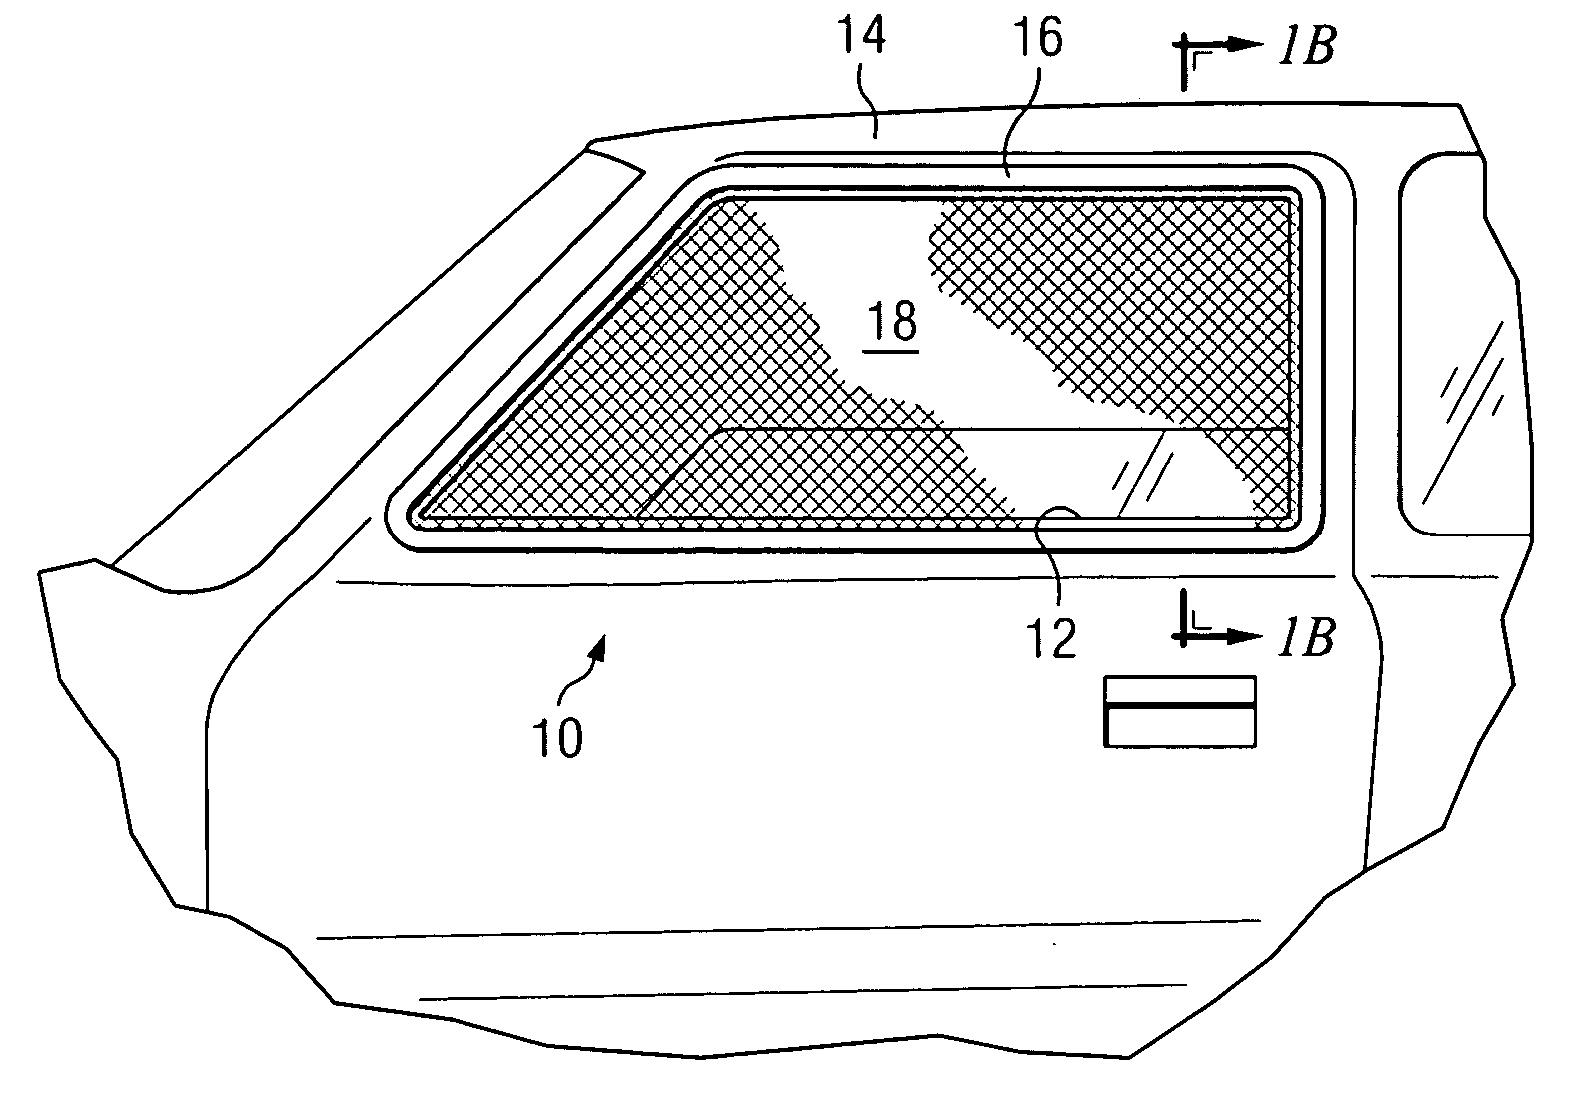 Removable insect barrier for substantially preventing entrance of insects through an opening of a vehicle or other enclosure